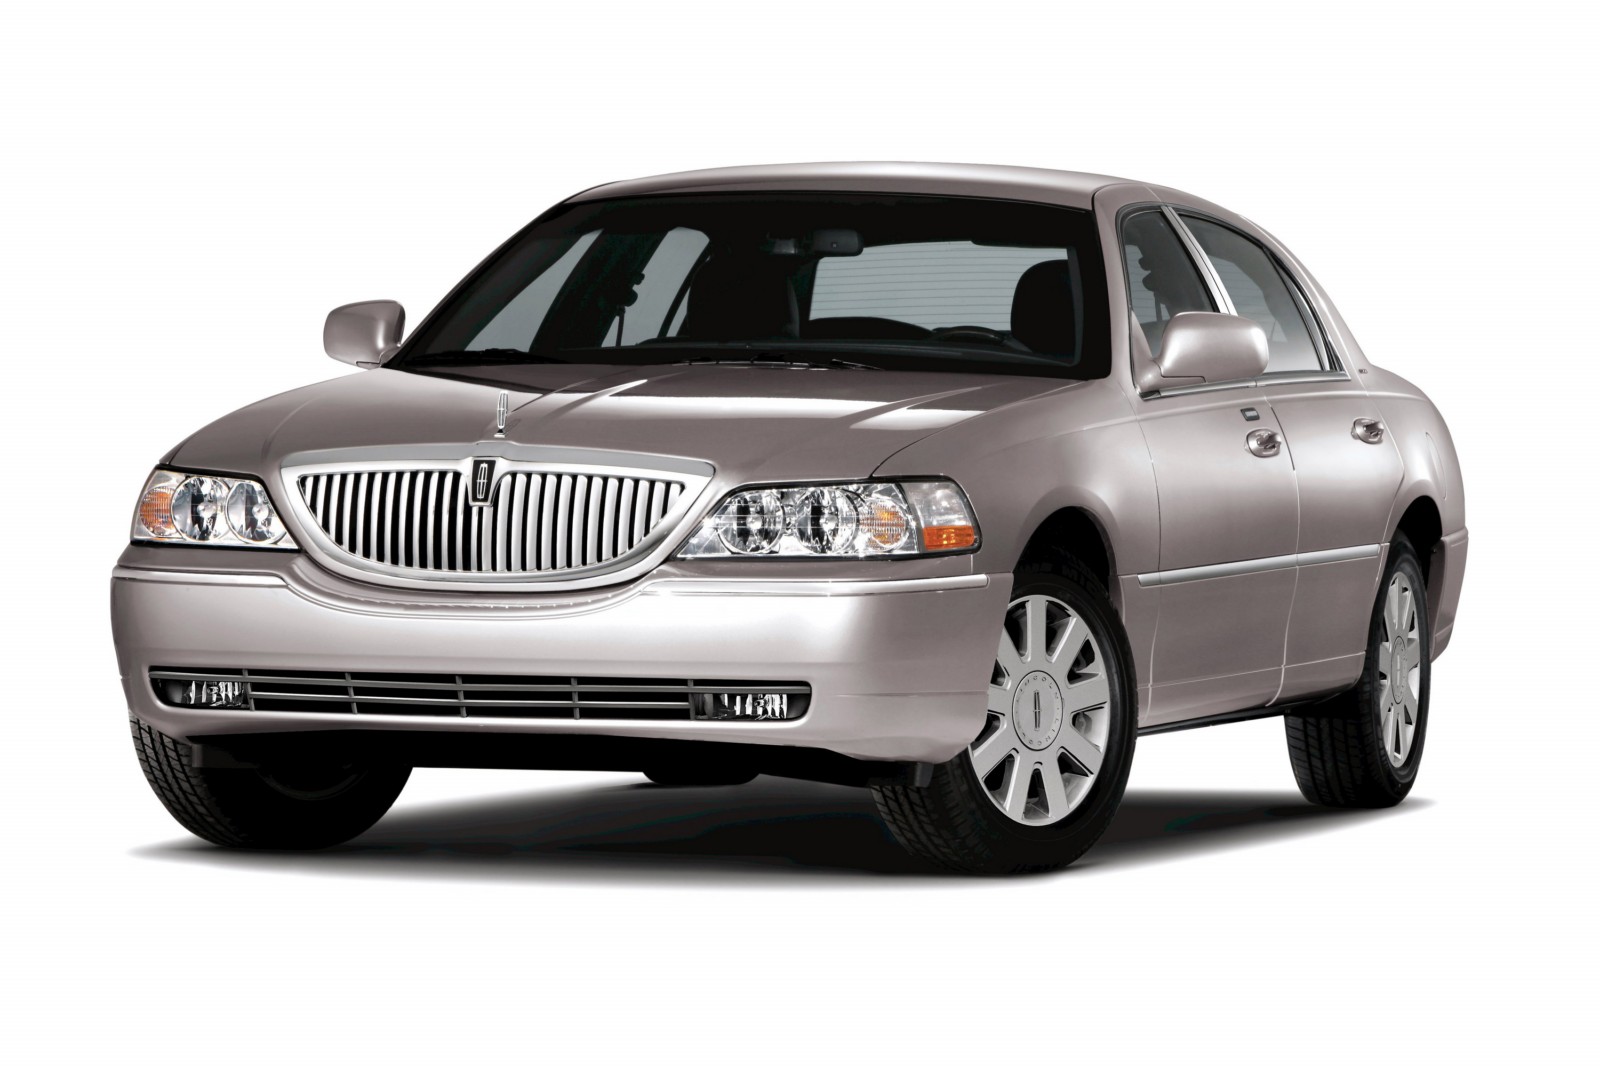 2010 Lincoln Town Car Review: Prices, Specs, and Photos - The Car Connection